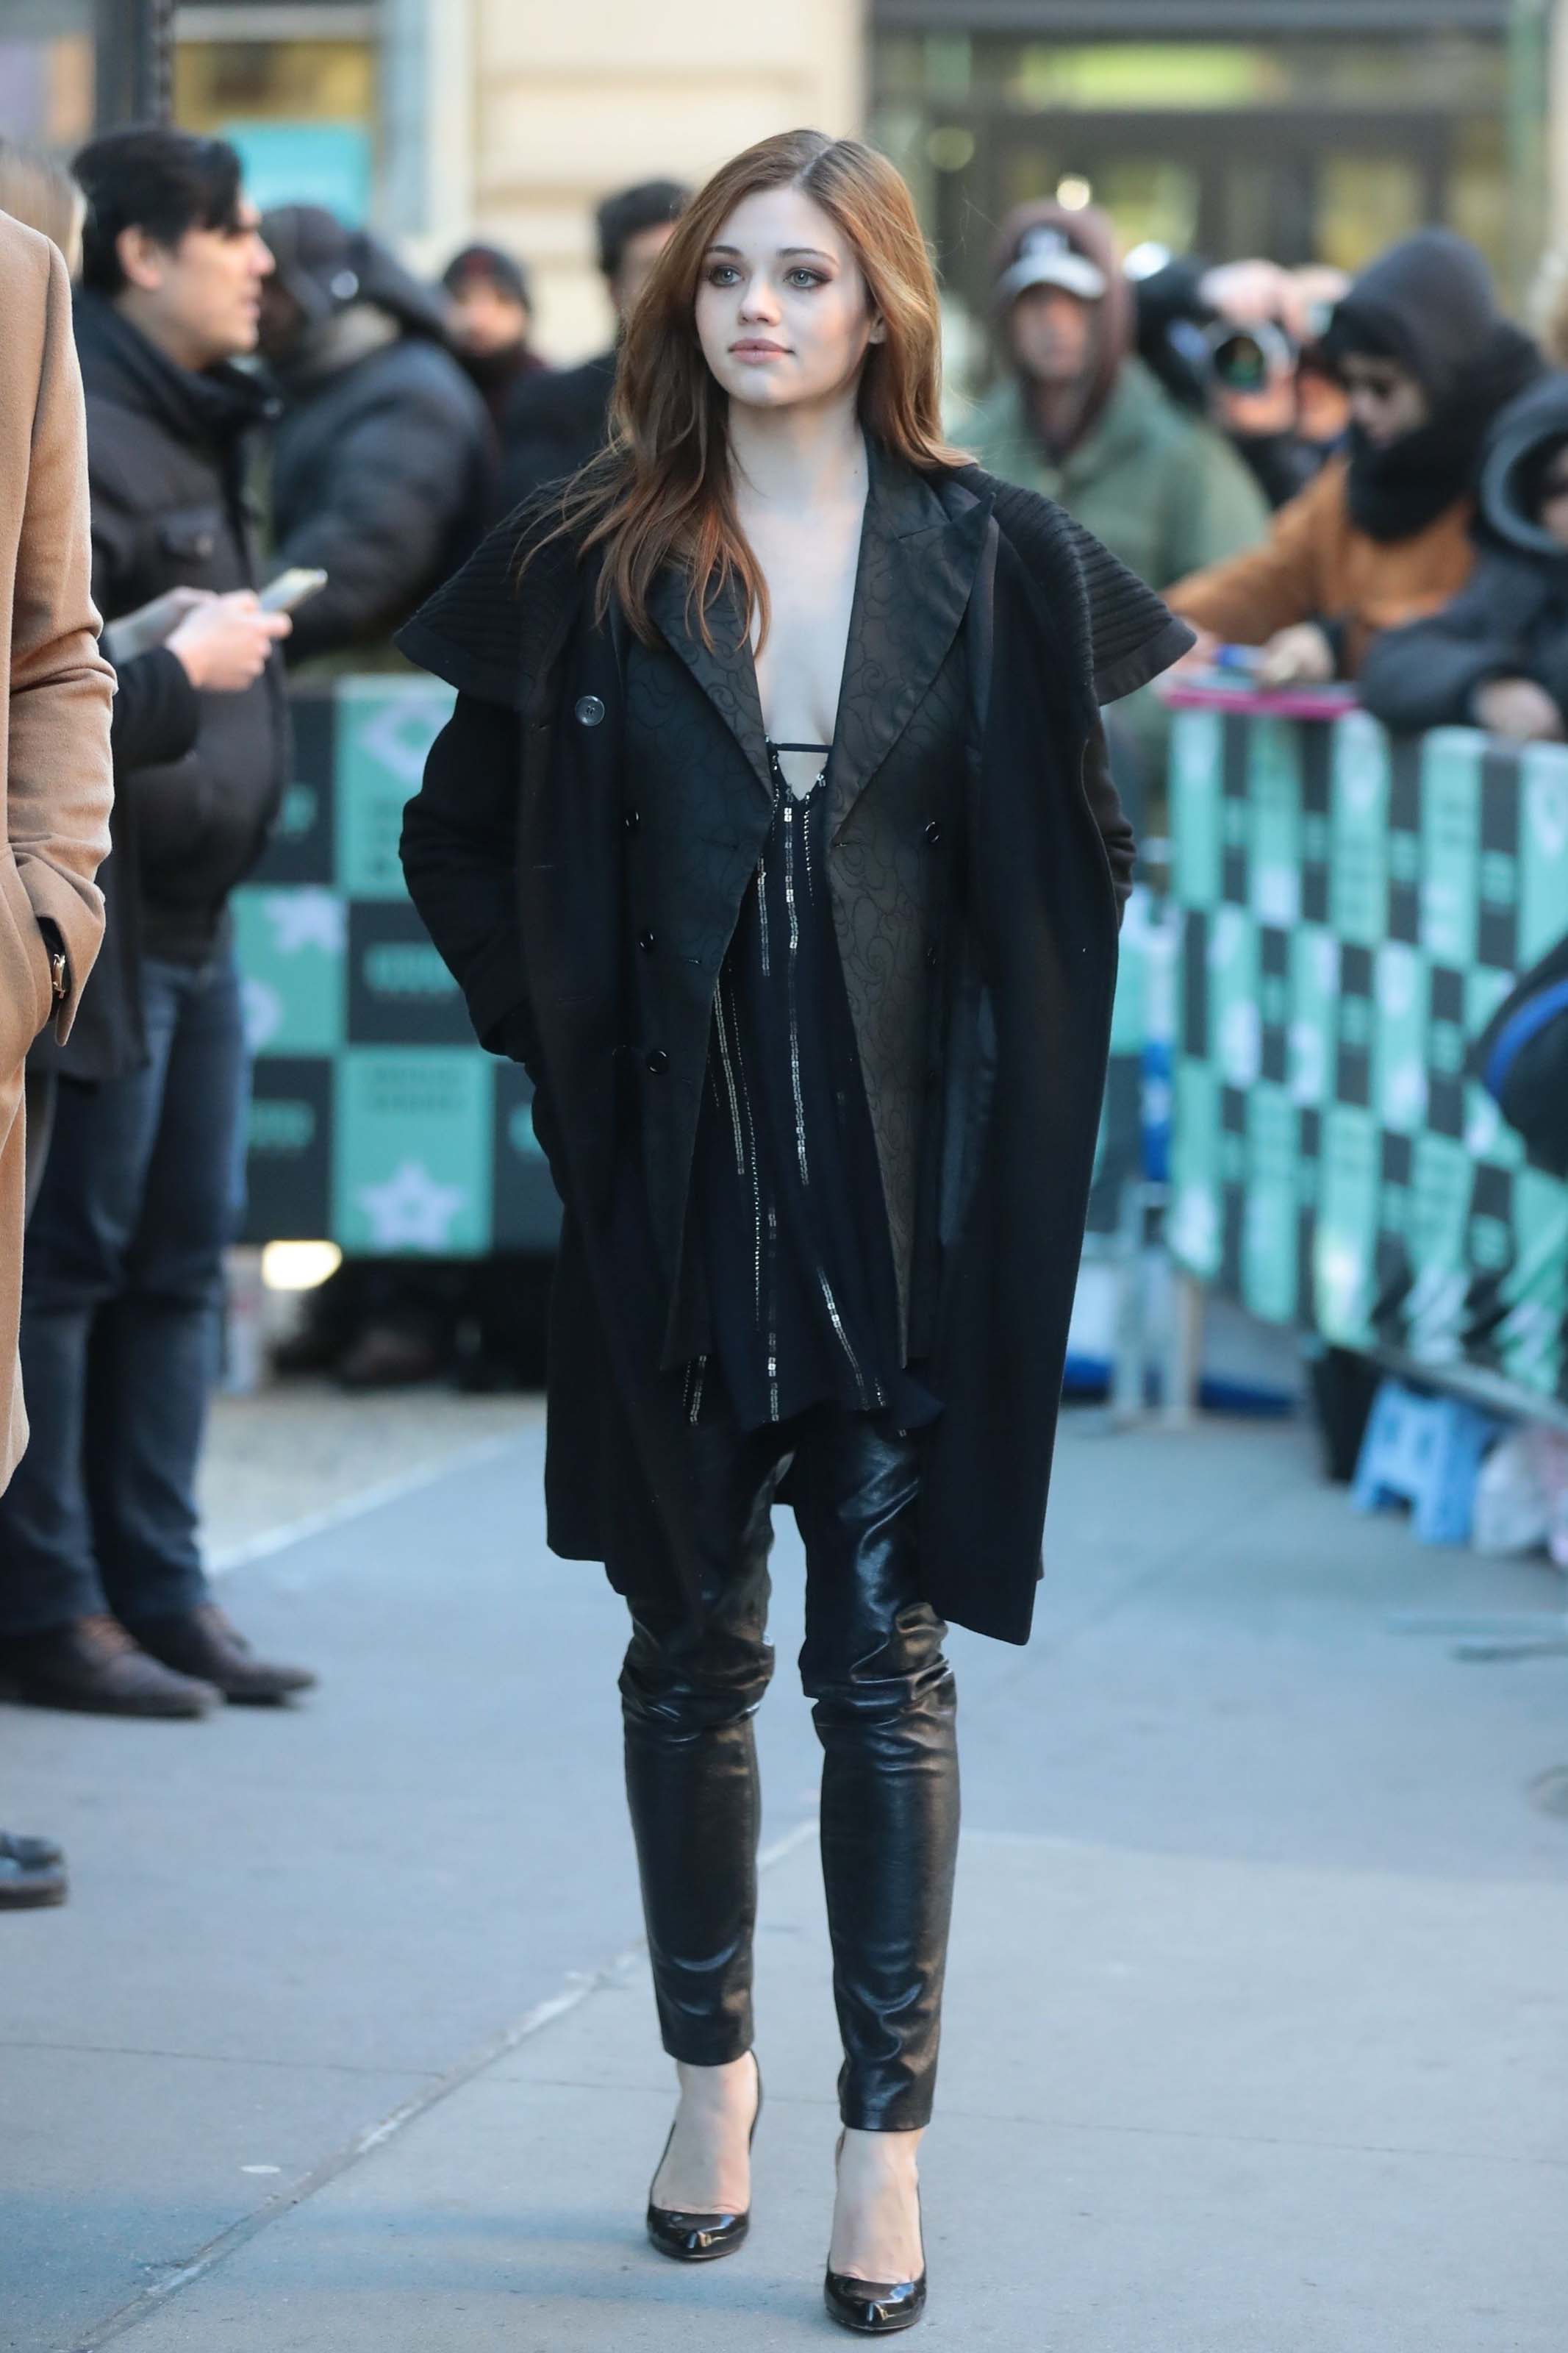 India Eisley attends AOL Build Series